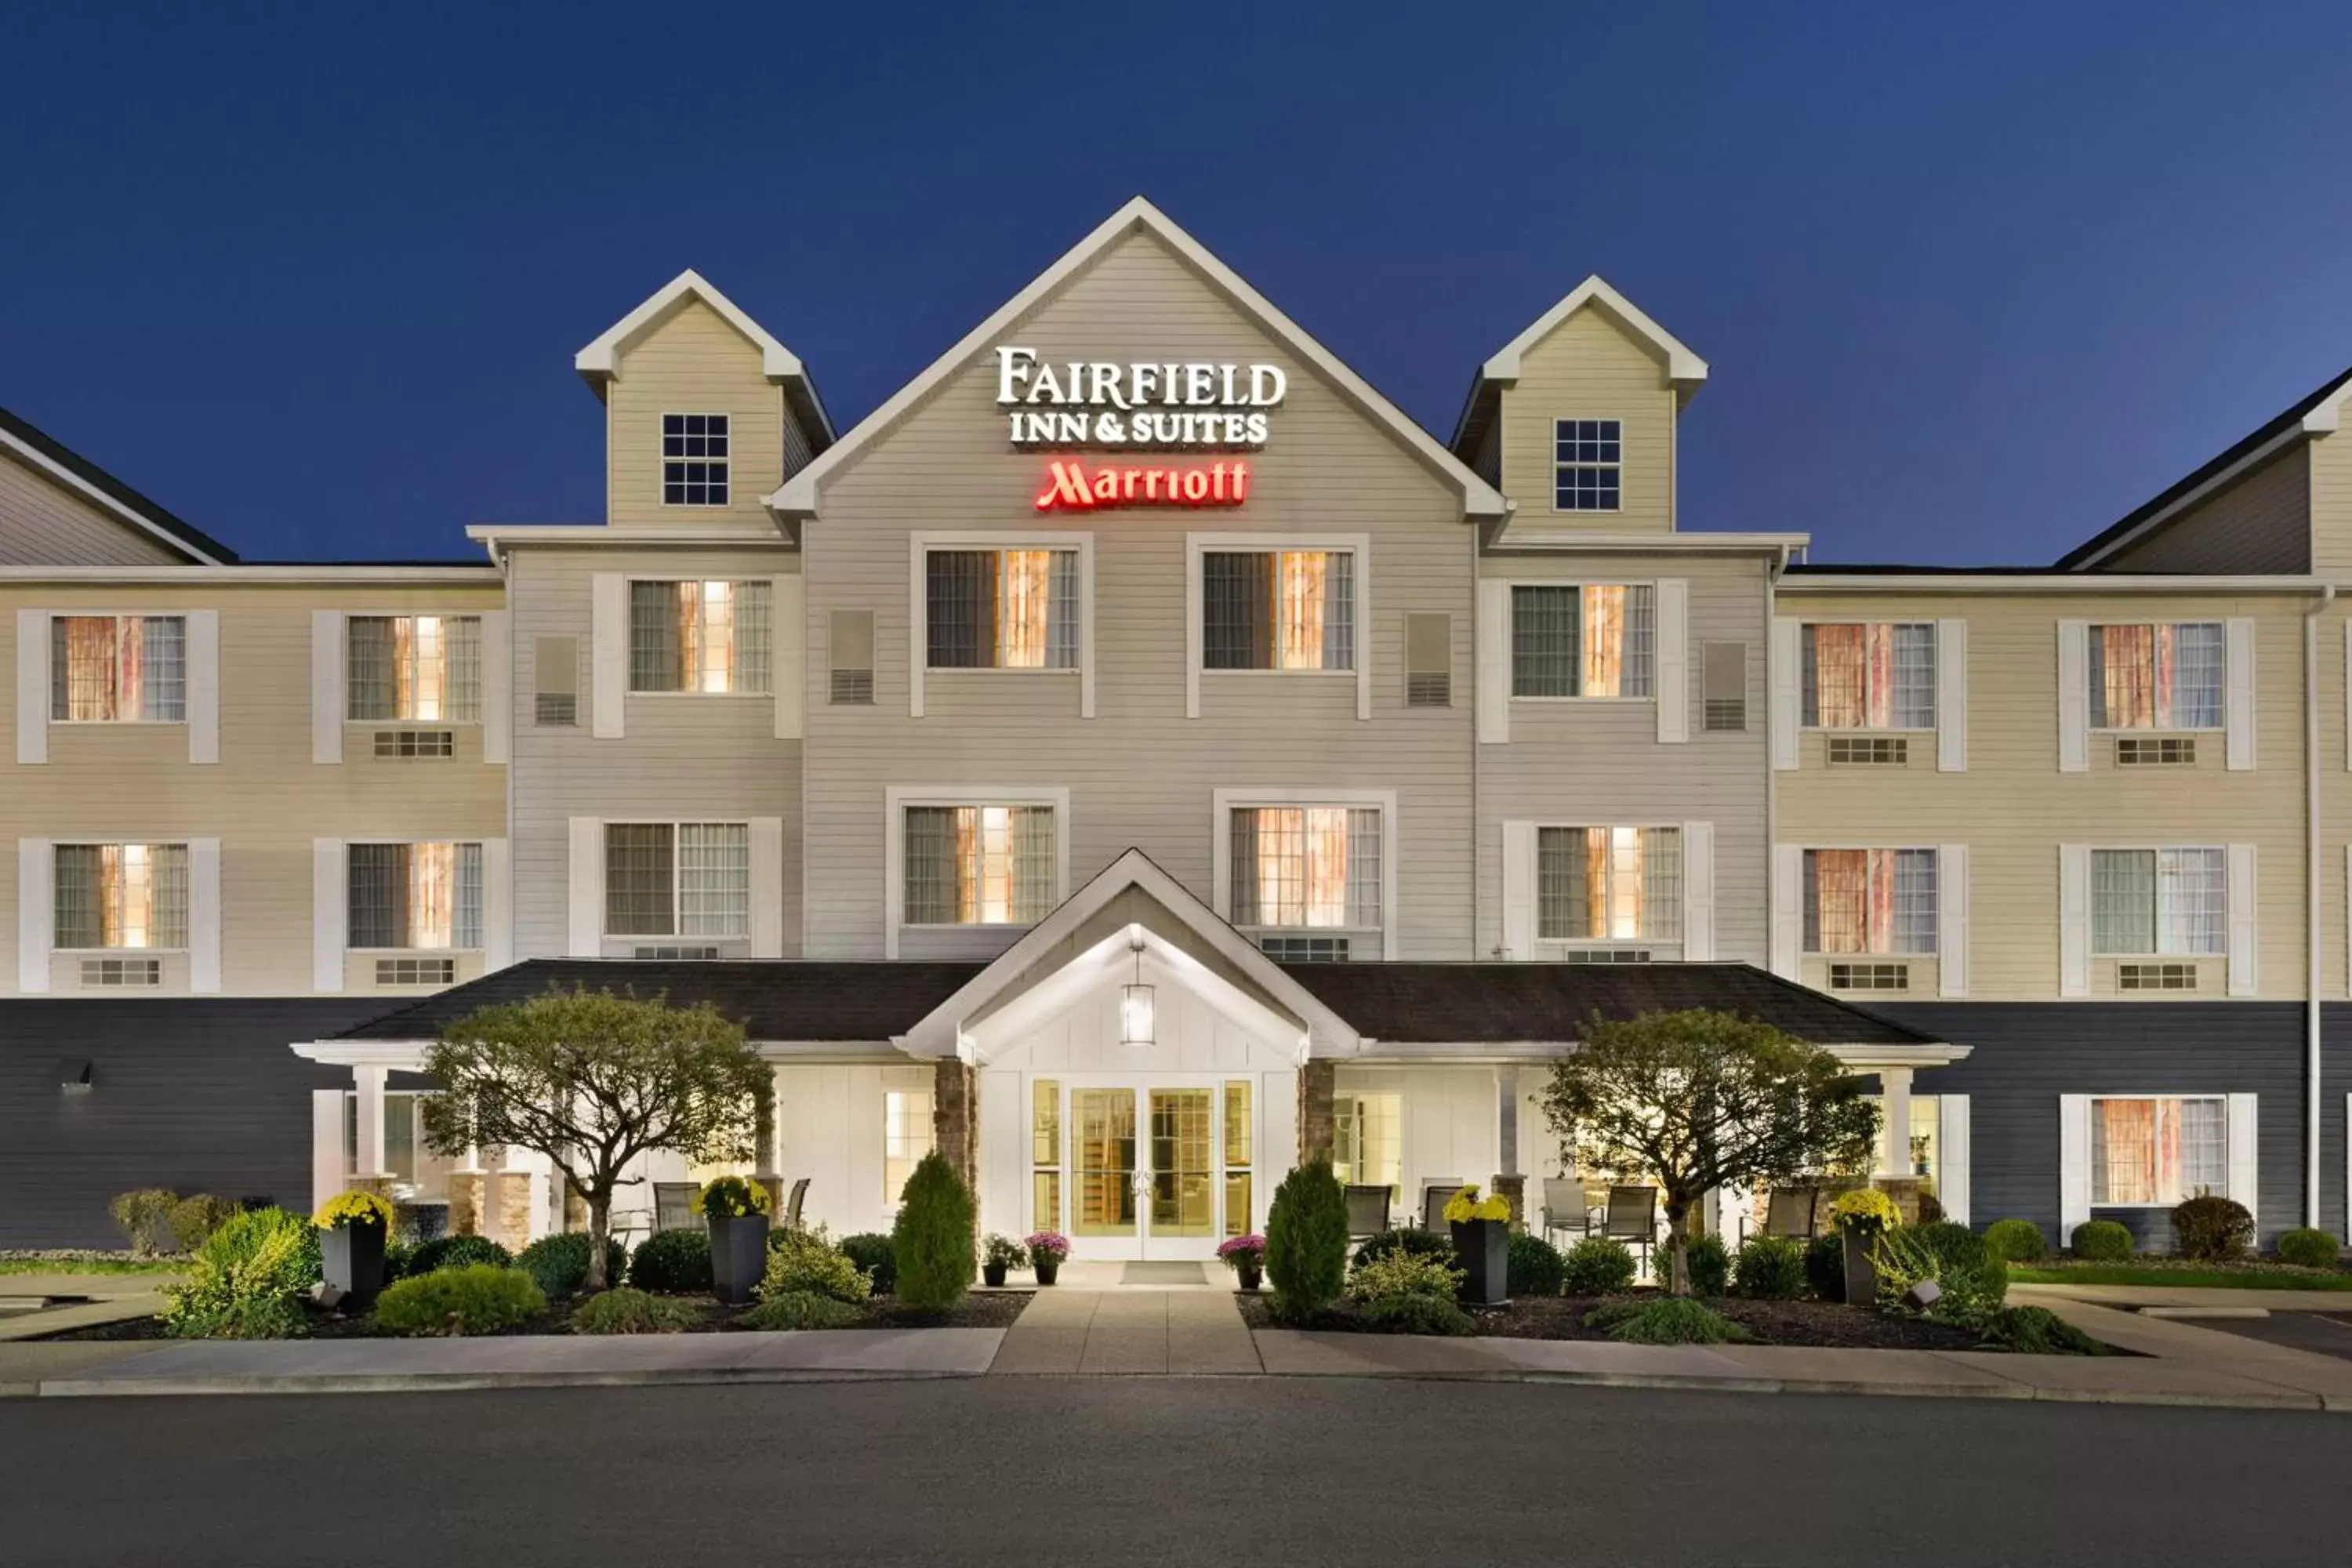 Property Building in Fairfield Inn & Suites Wheeling - St. Clairsville, OH